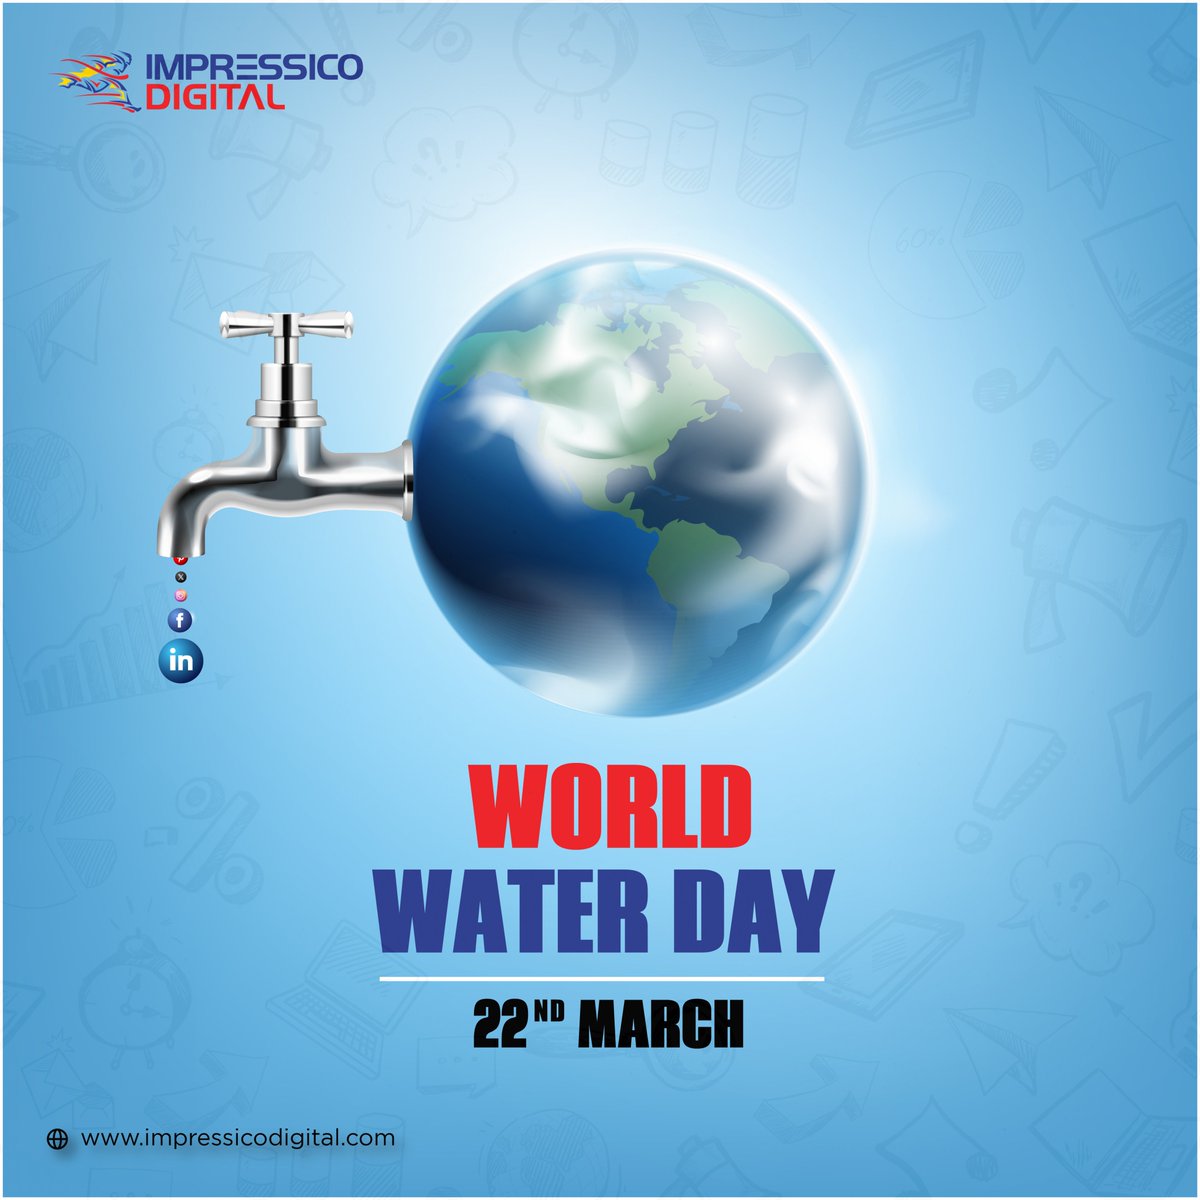 Impressico Digital stands with the global community in celebrating International World Water Day. 💧🌐

Happy World Water Day from the Impressico Digital team! Let's make a difference, one digital solution at a time. 💻🌍

#WorldWaterDay #ImpressicoDigital #DigitalForGood